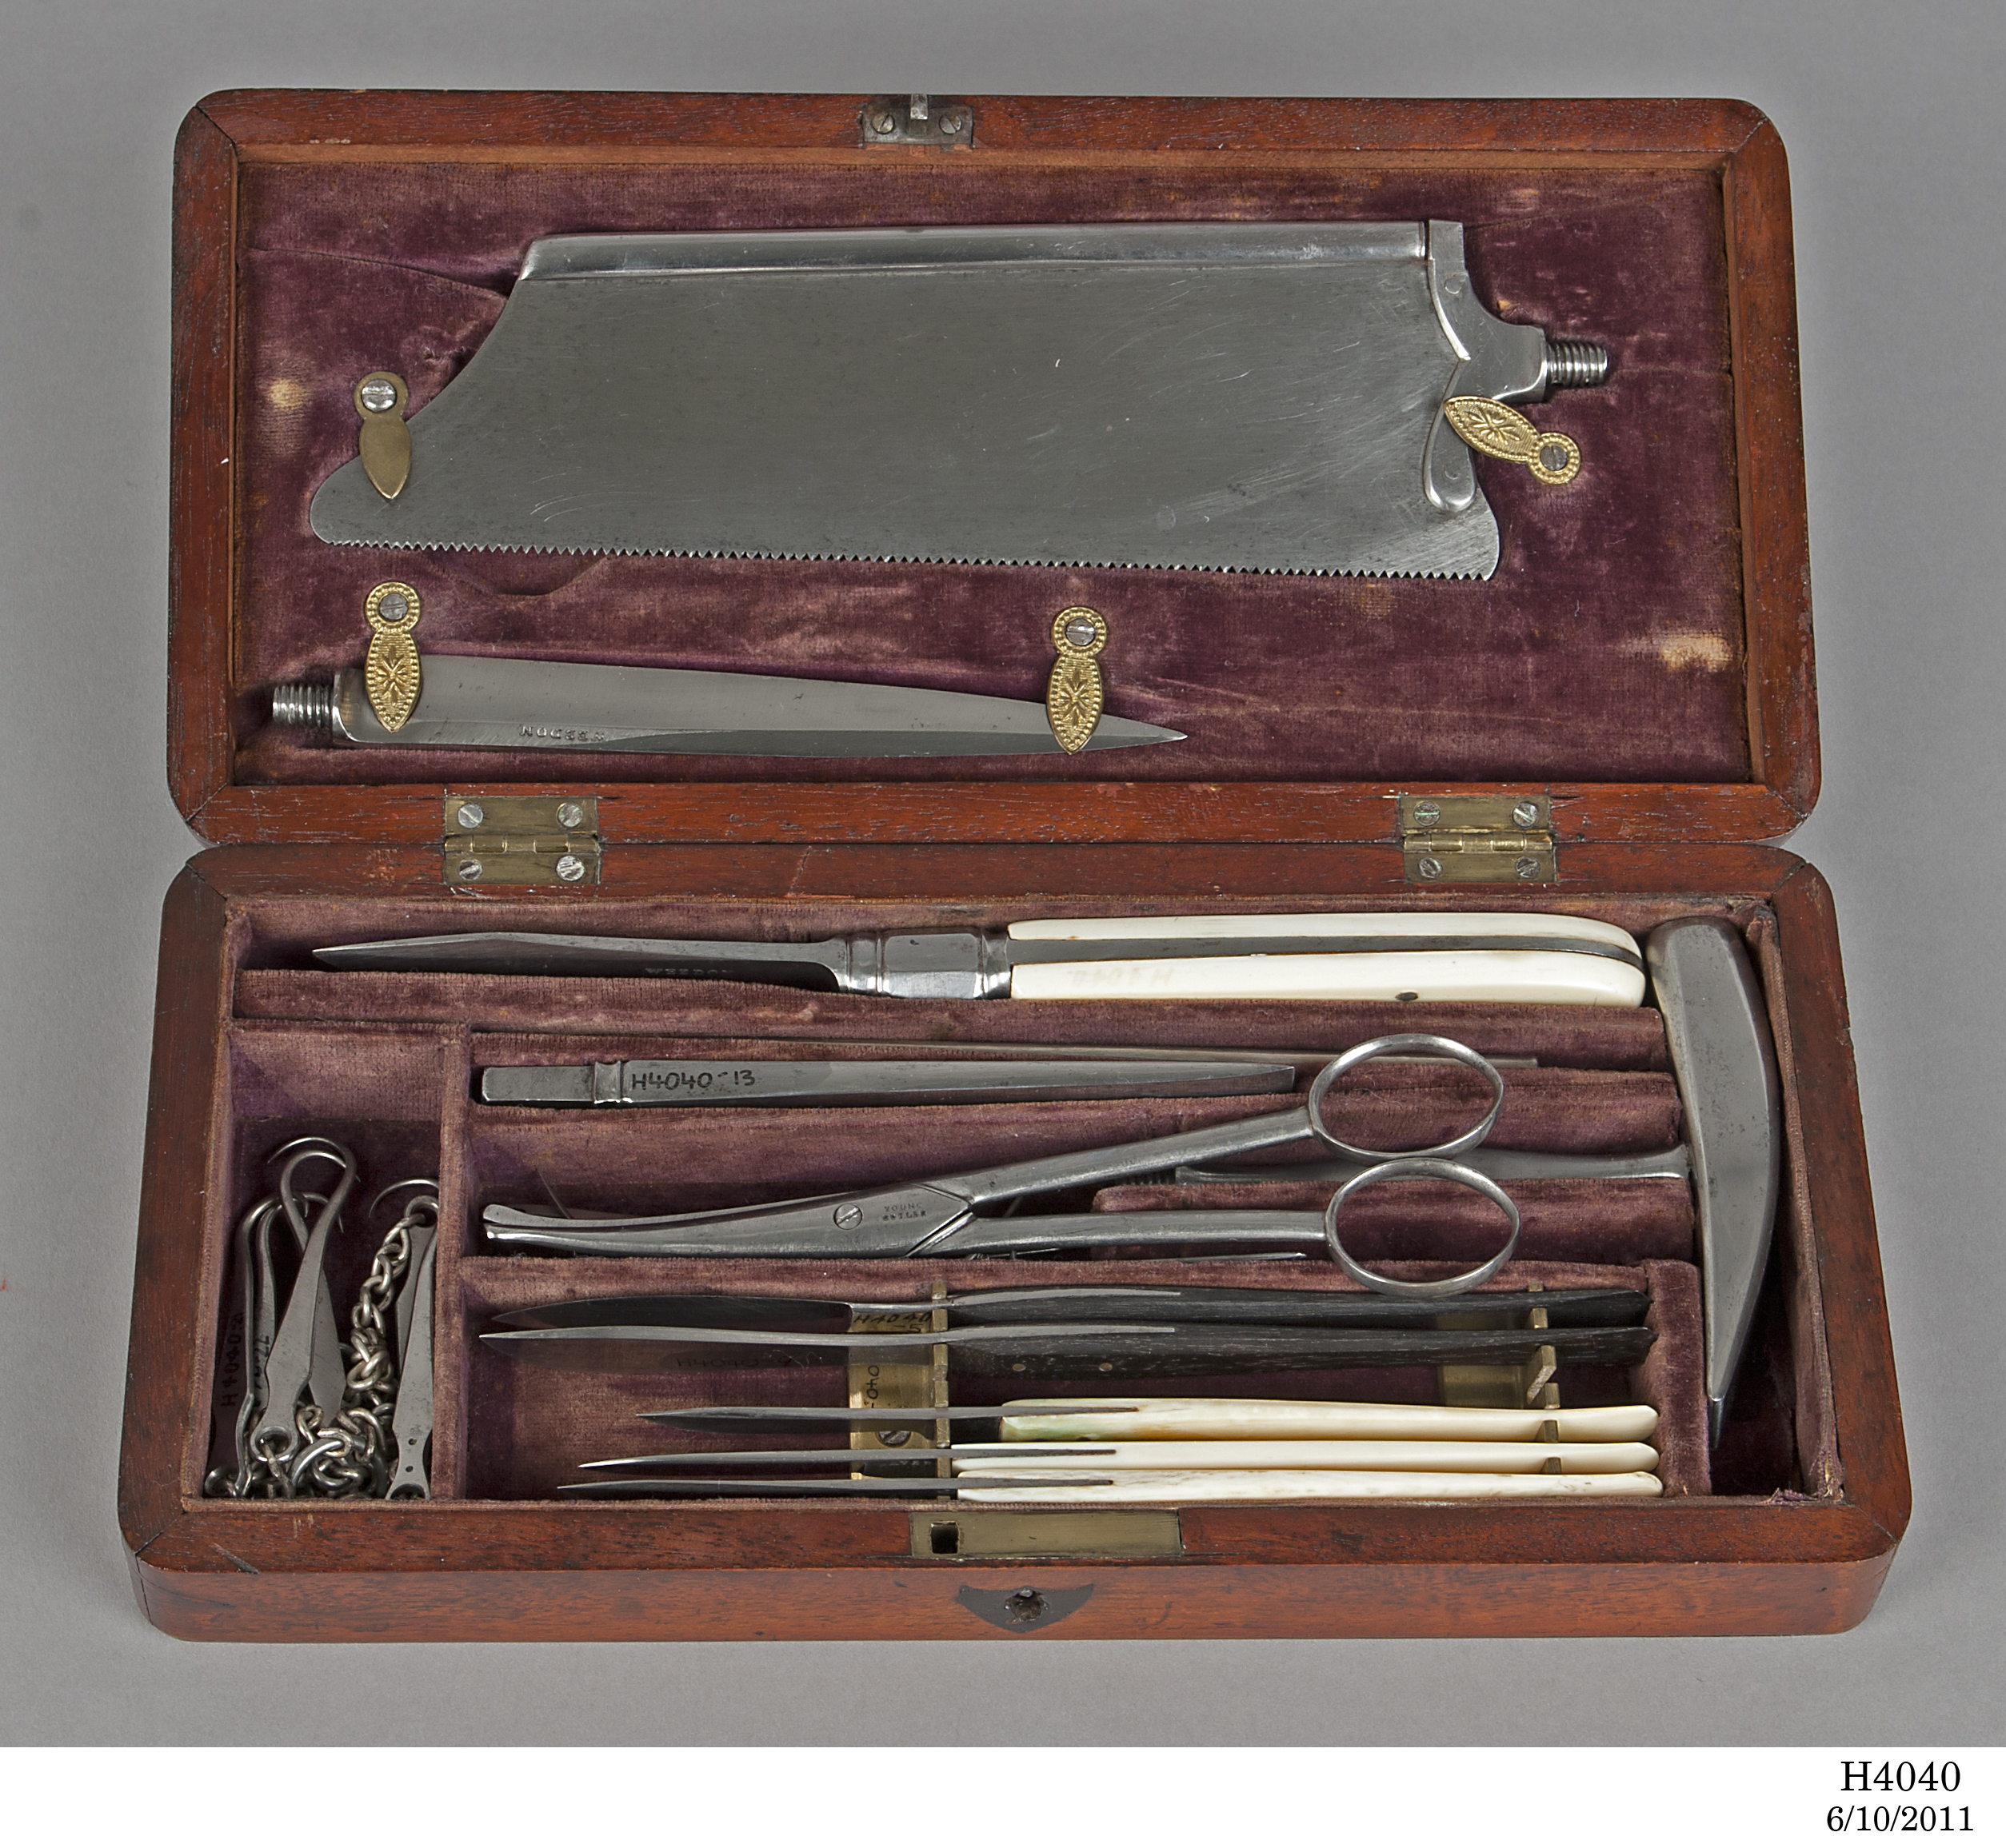 Set of Weedon post-mortem instruments used by Dr Charles Nathan in Sydney, 1830-1860